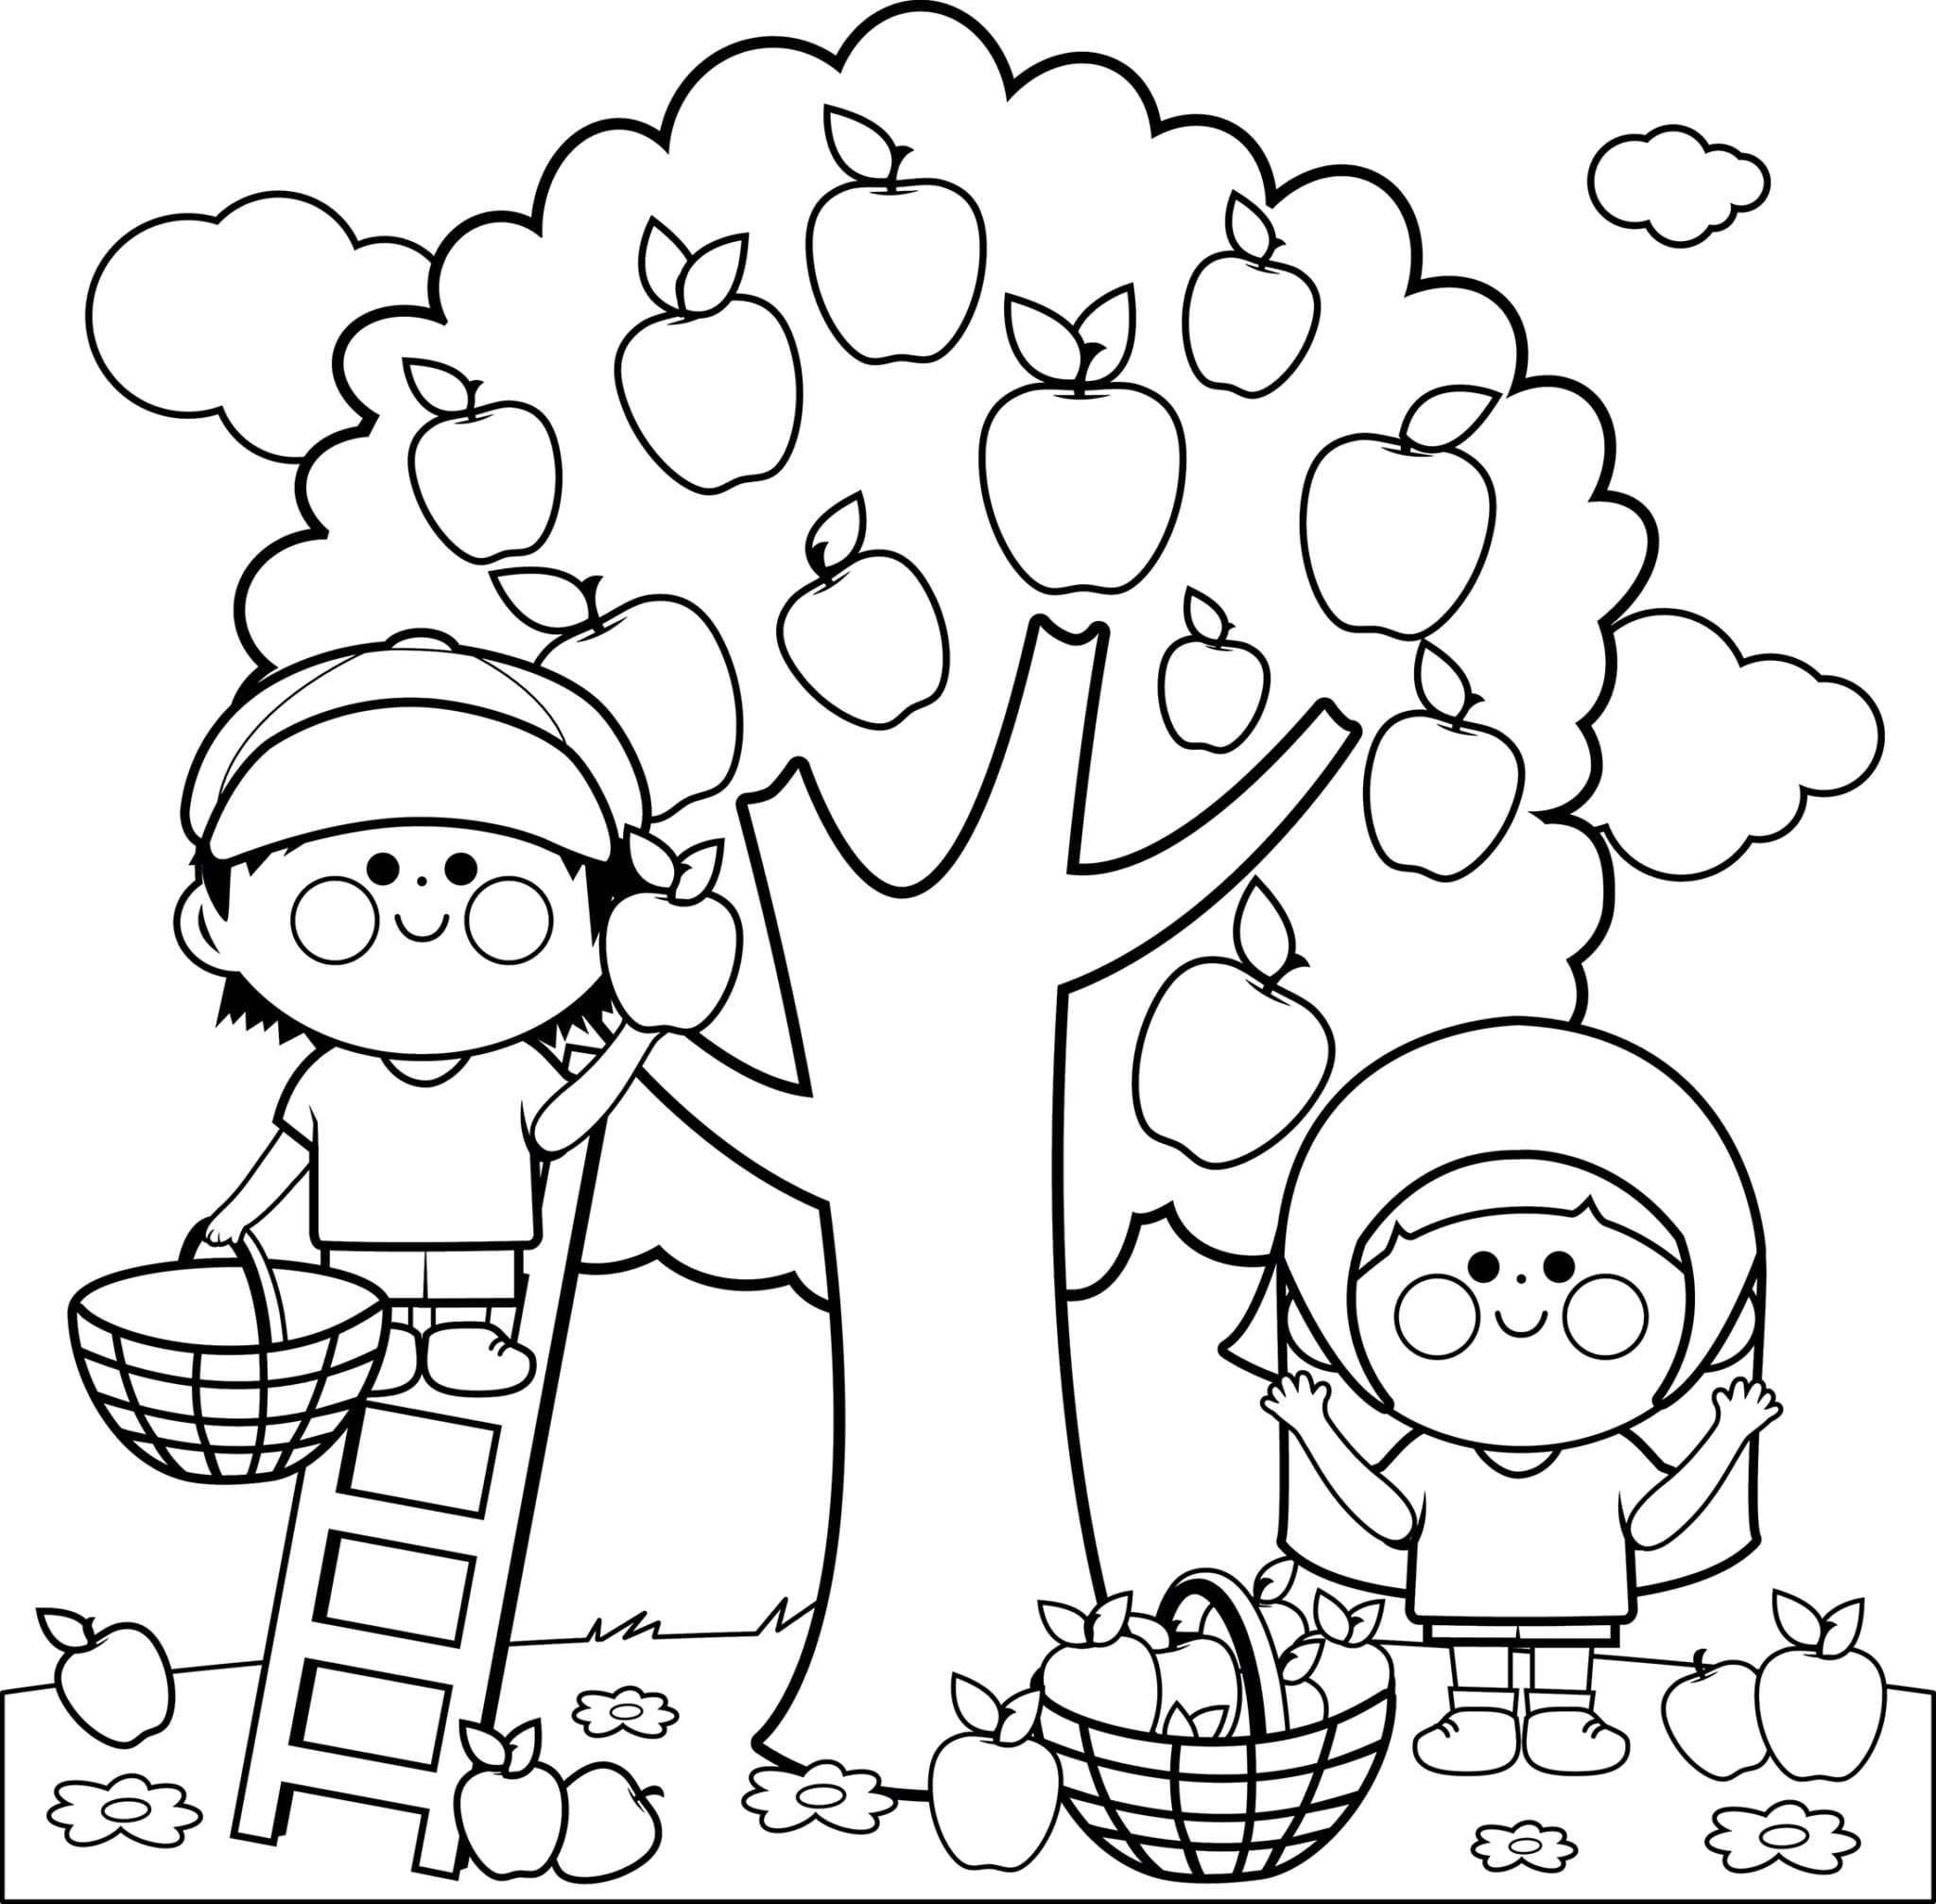 printable coloring page that depicts children picking apples